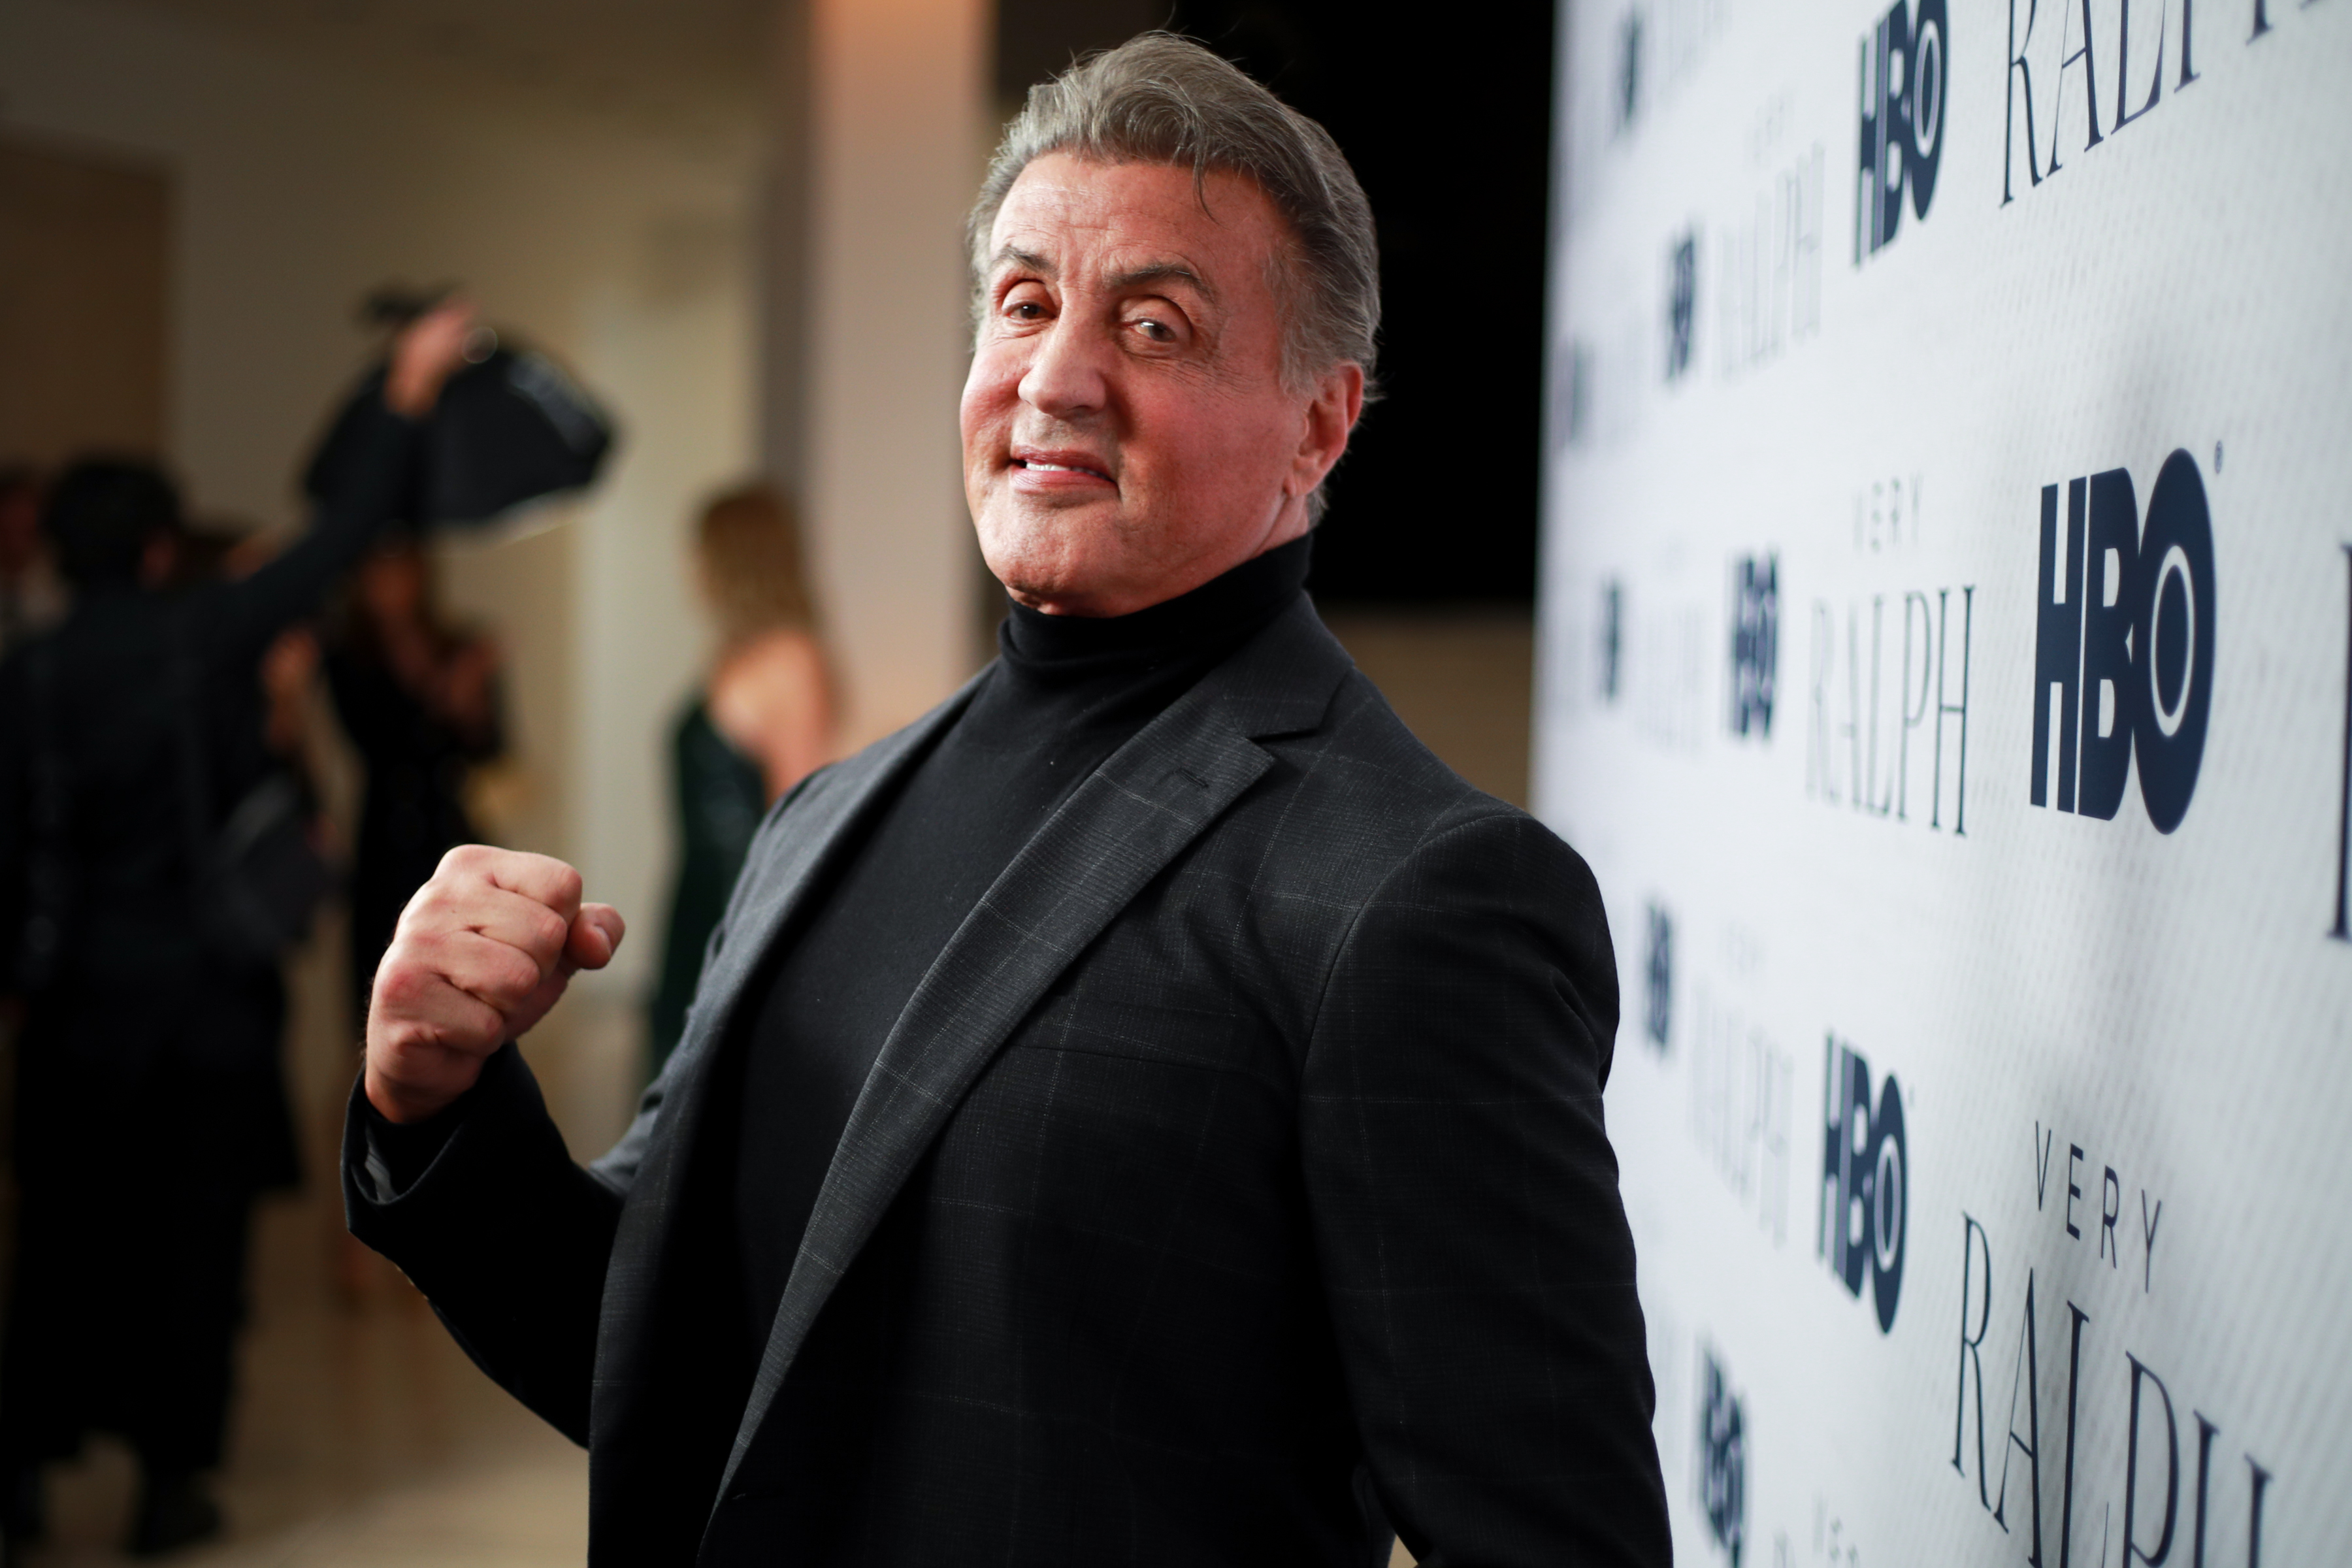 Sylvester Stallone Joins Cast Of James Gunn’s “The Suicide Squad”